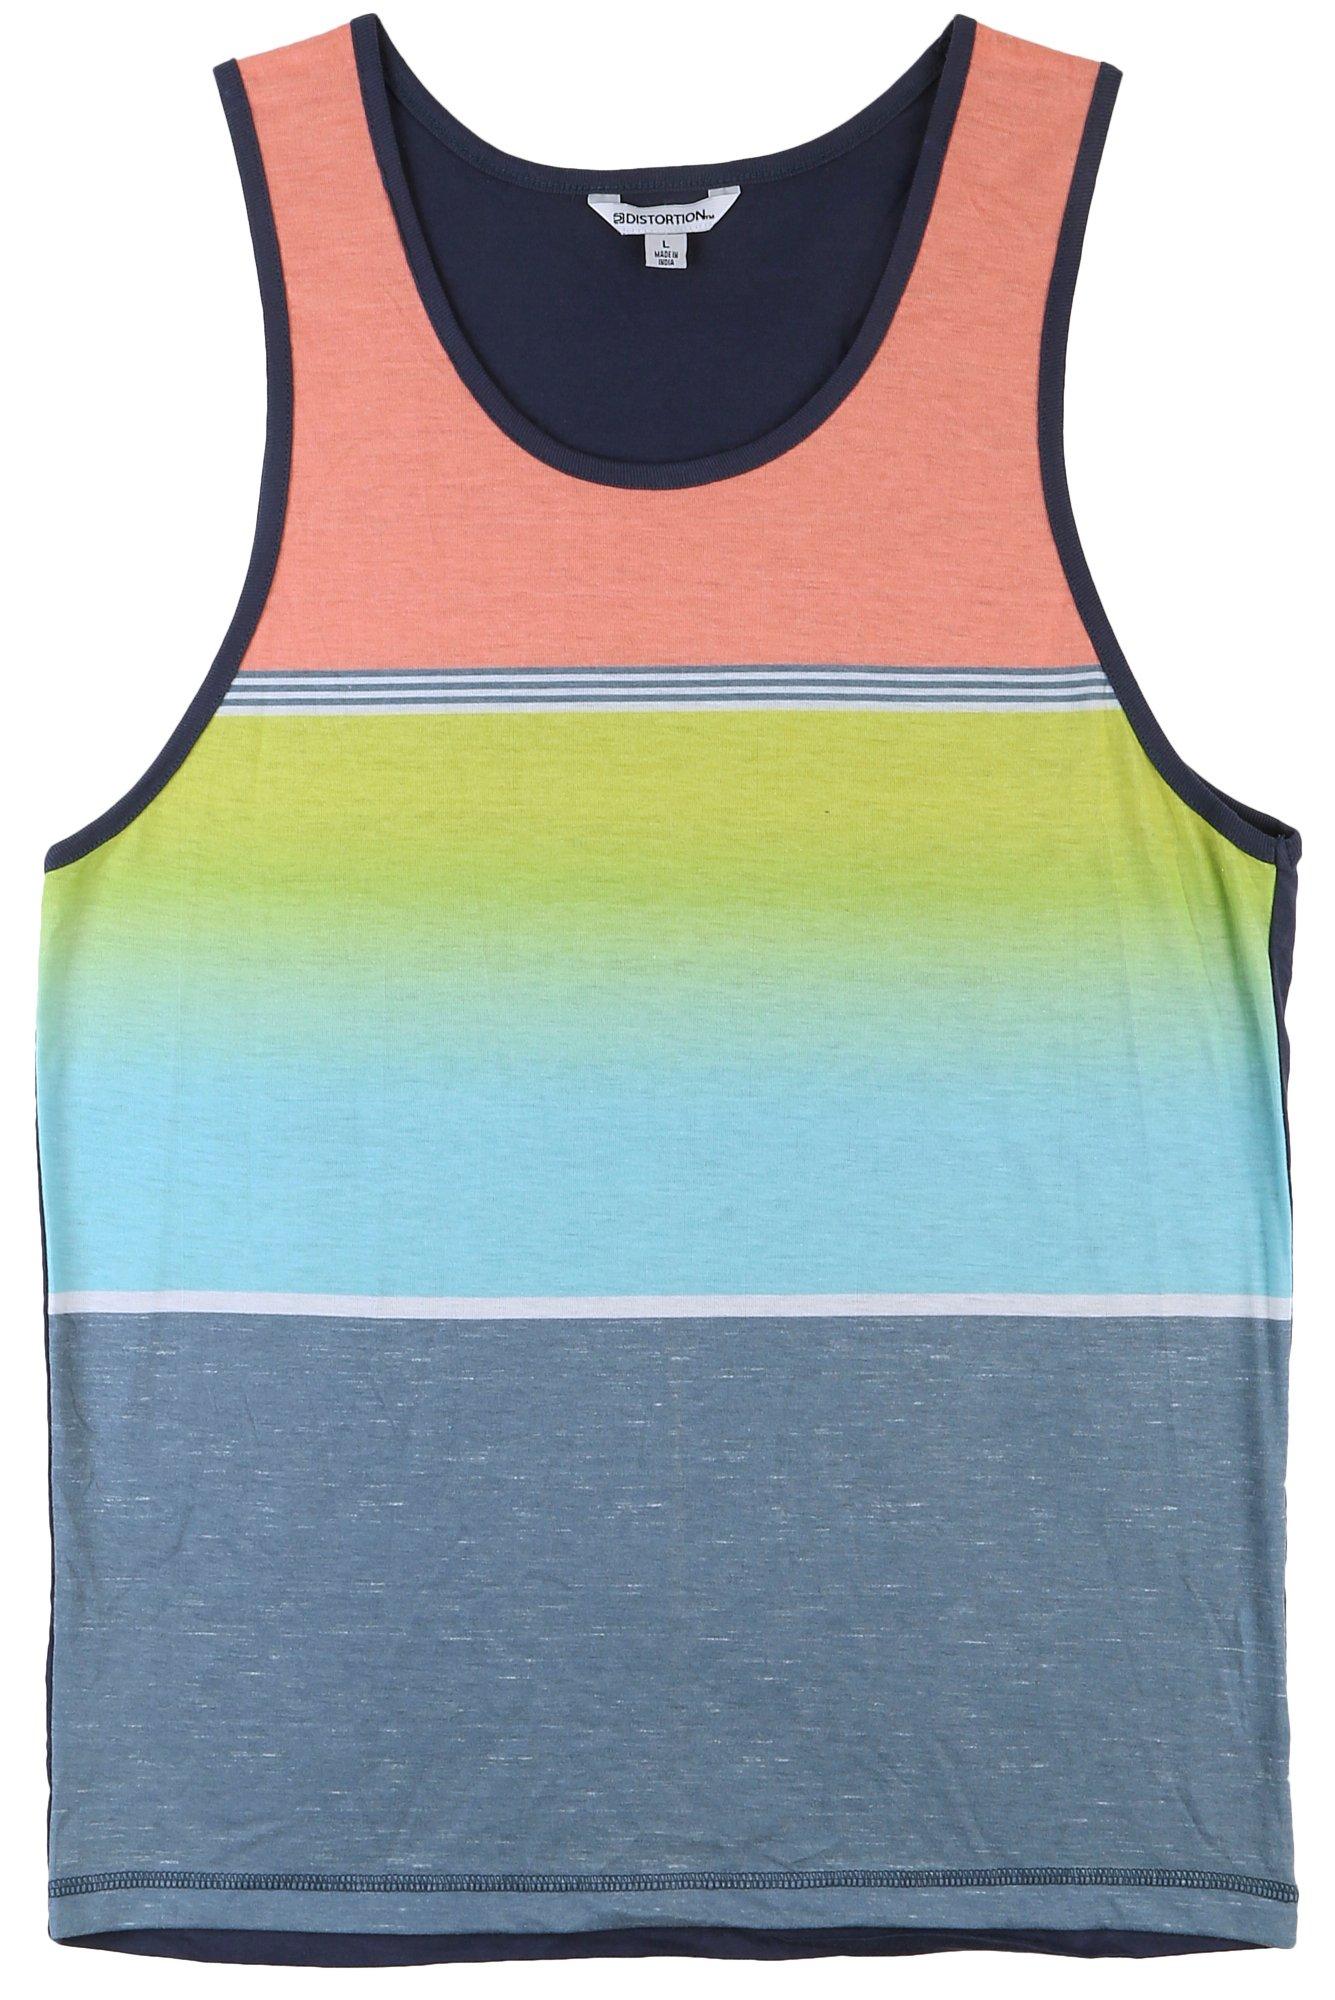 Mens Multi Colored Muscle Tank Top